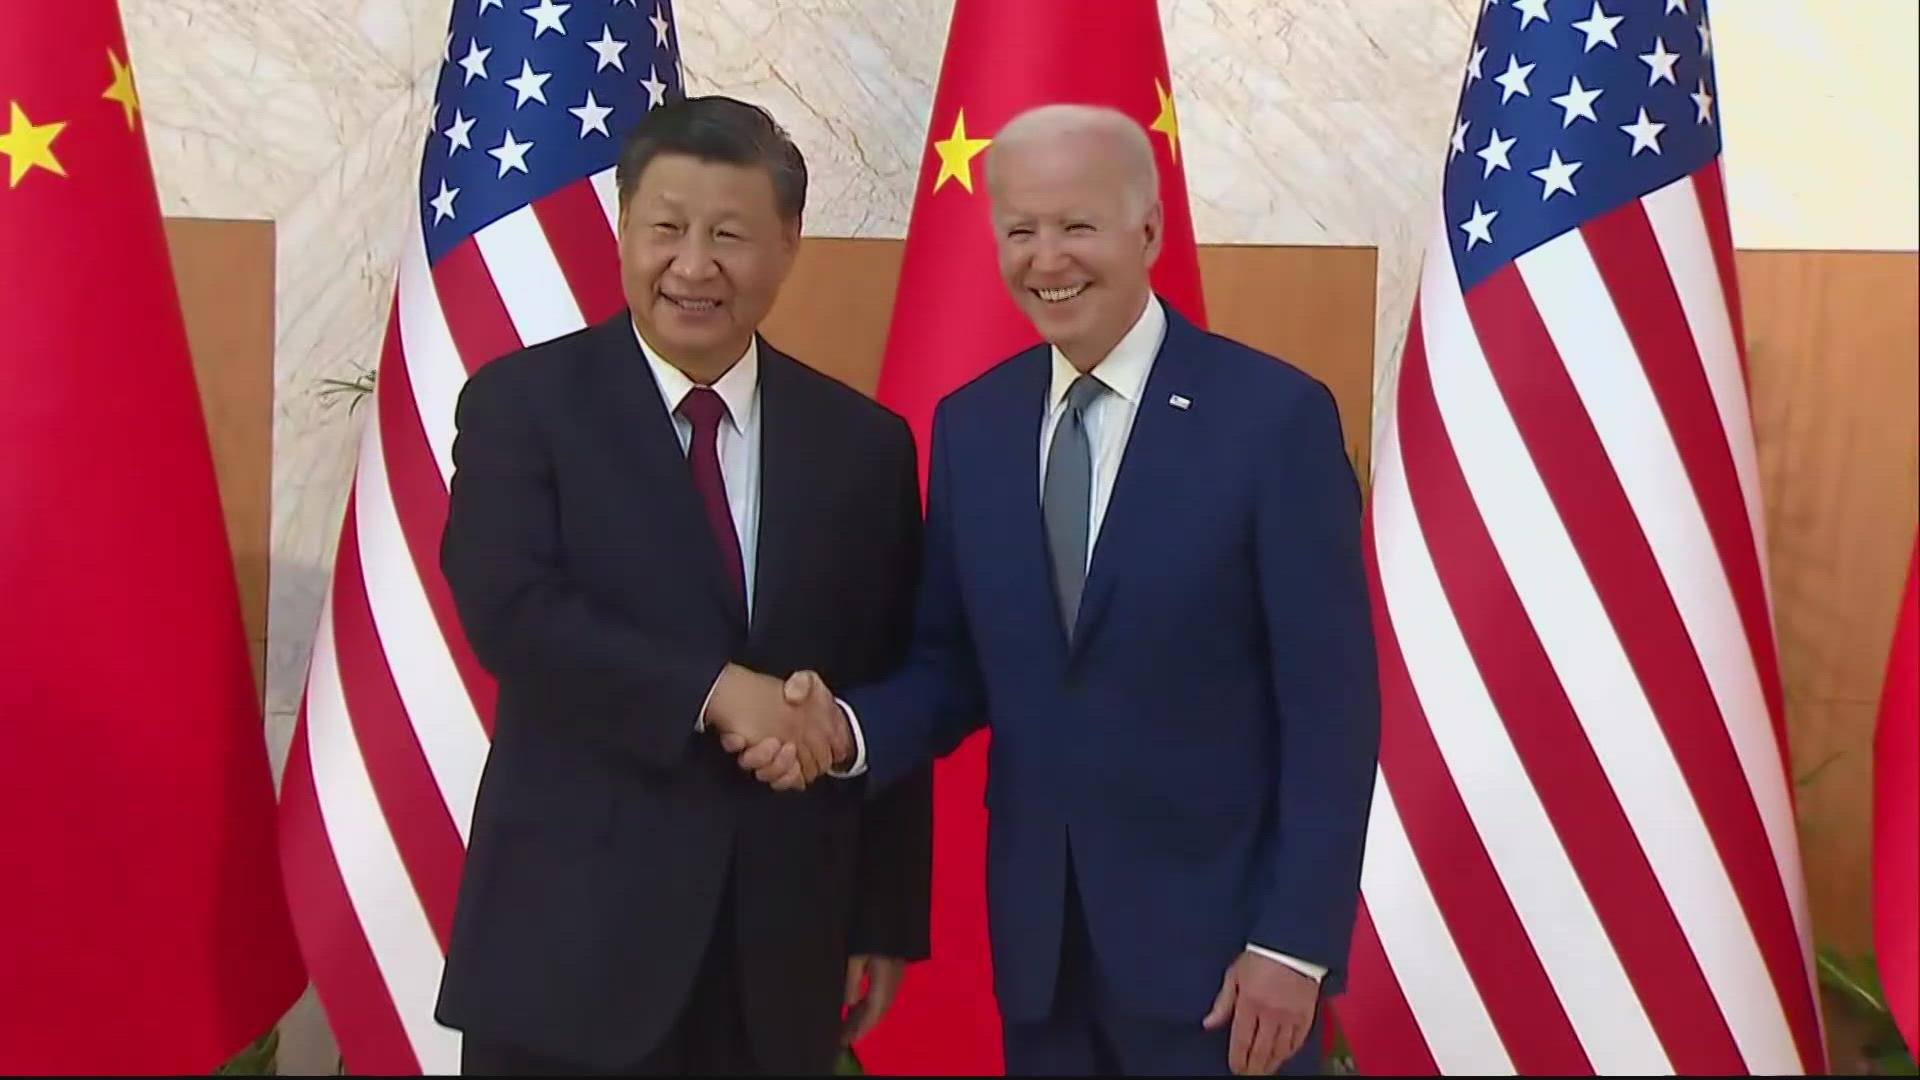 The Biden administration is taking foreign and domestic heat for shooting down a Chinese spy balloon that traversed U.S. air space.